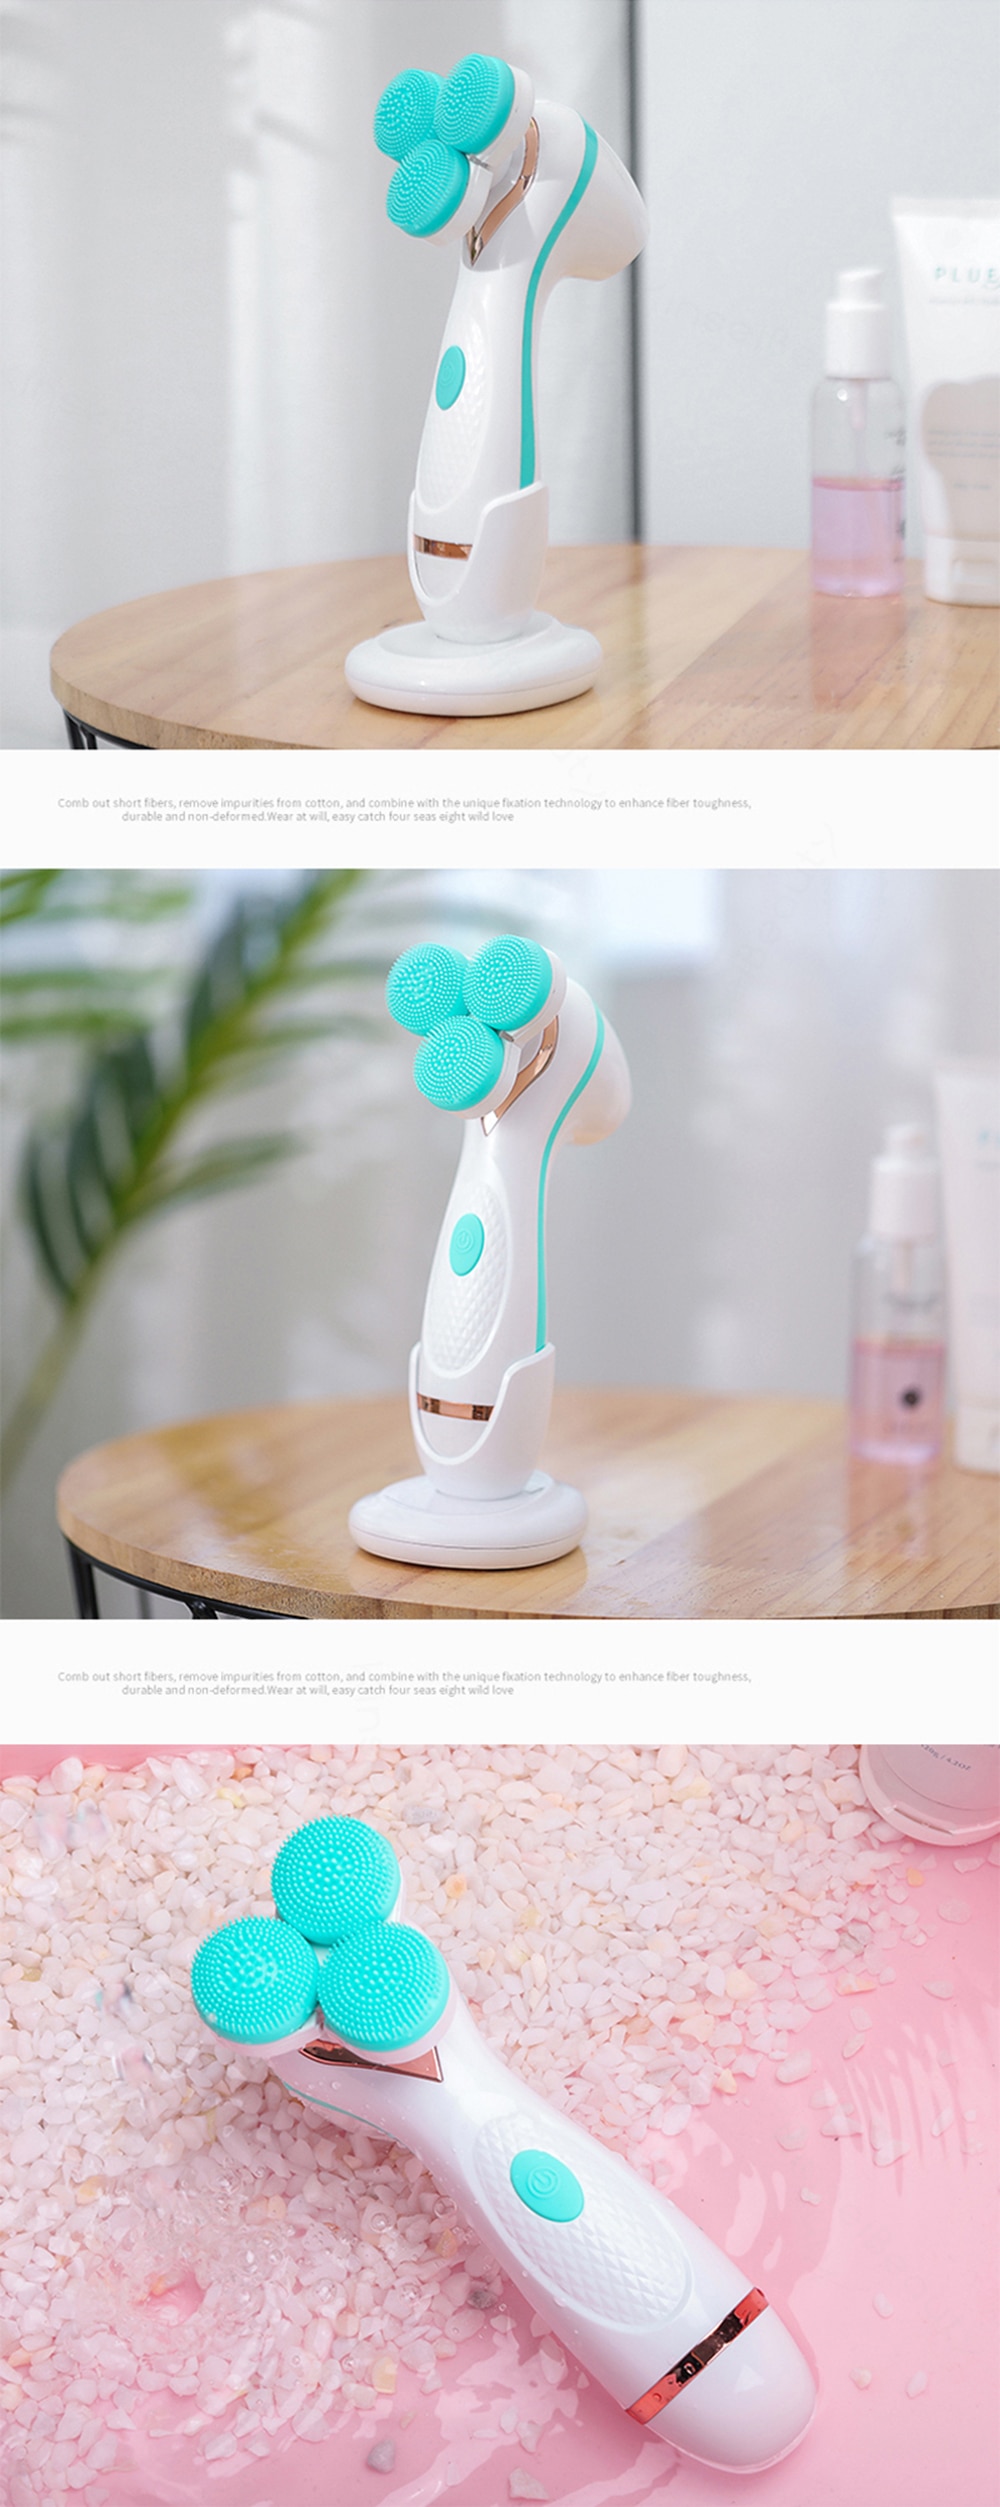 Pore cleaning electric face washer